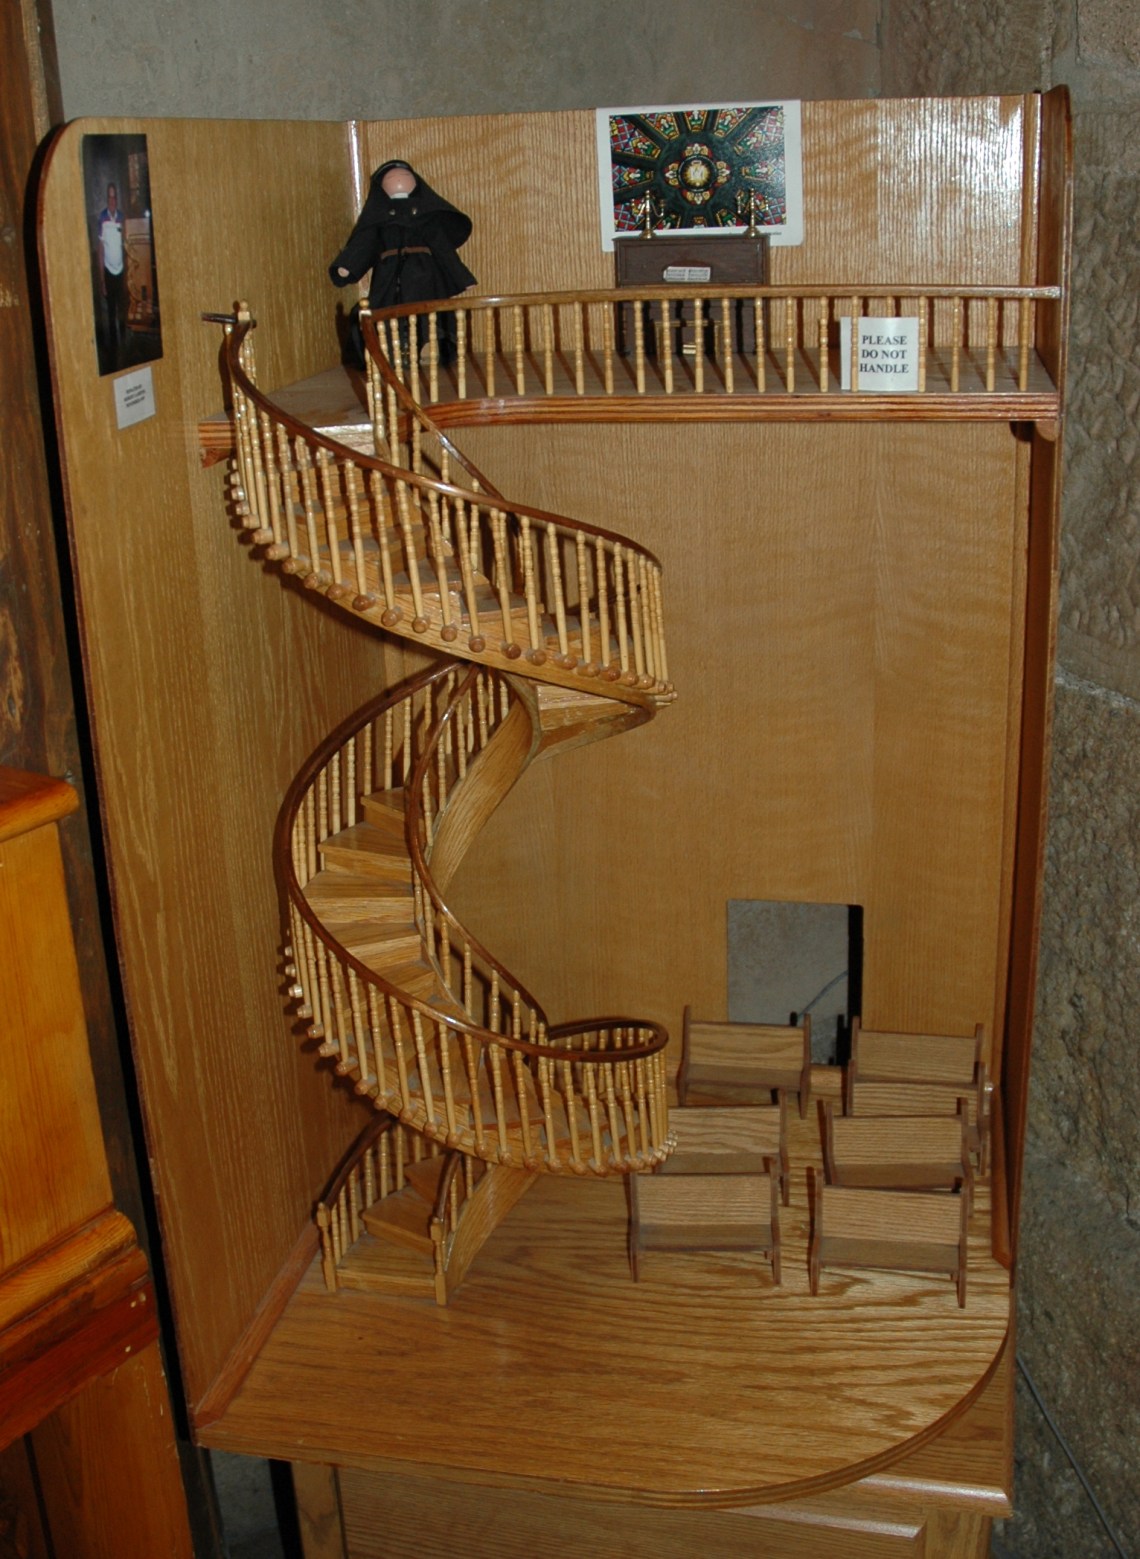 The staircase Saint Joseph built in New Mexico